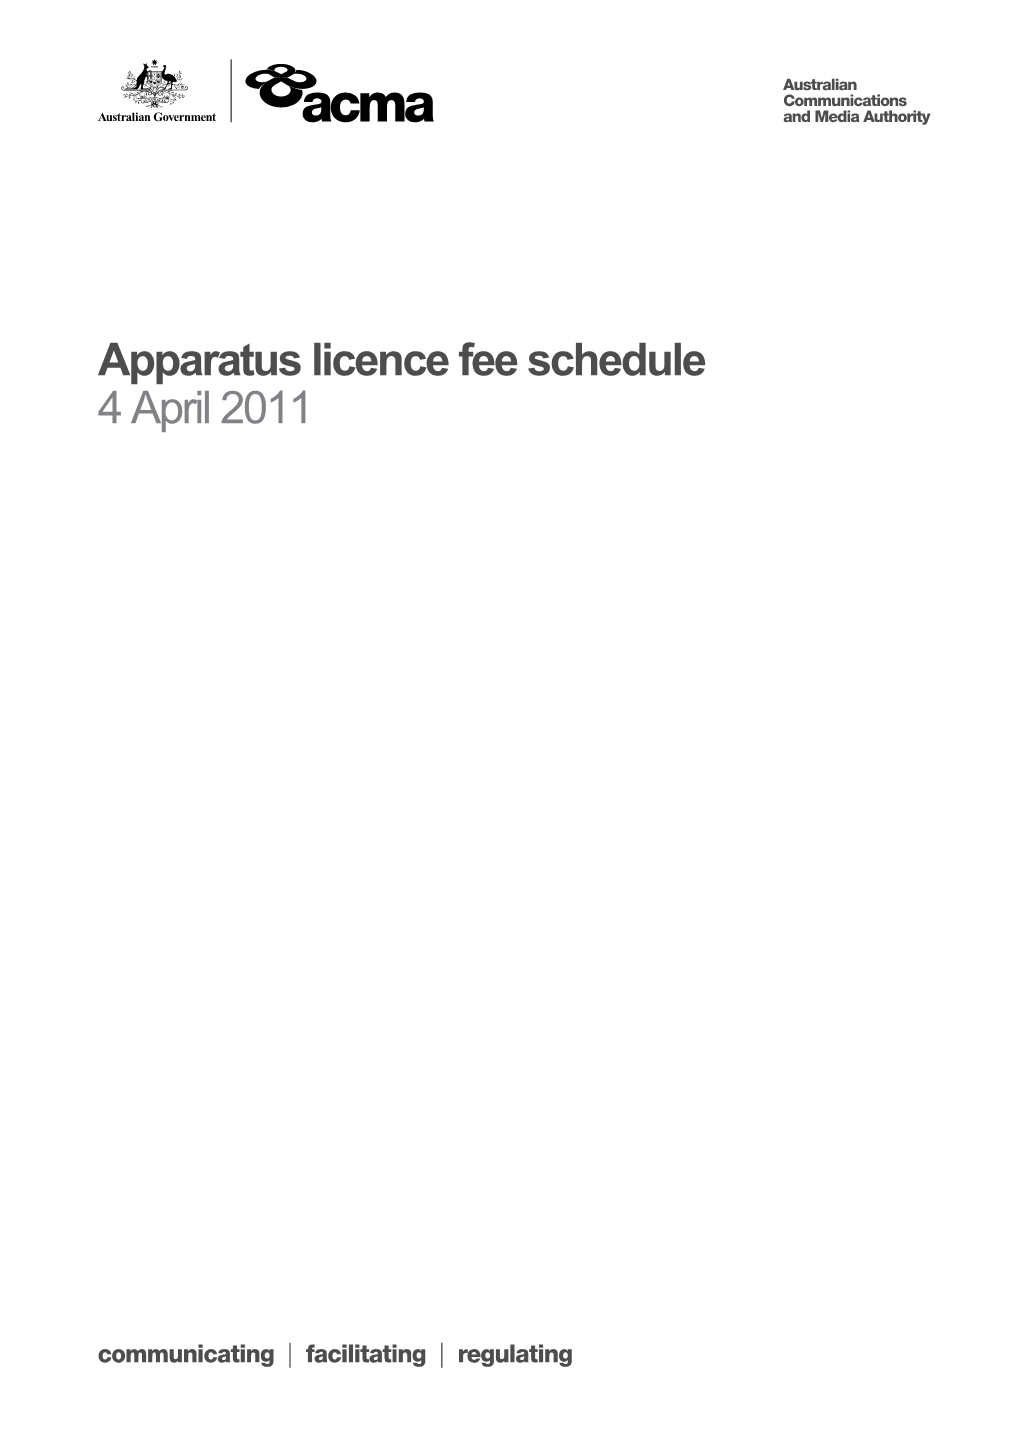 2011 Apparatus Licence Fee Schedule